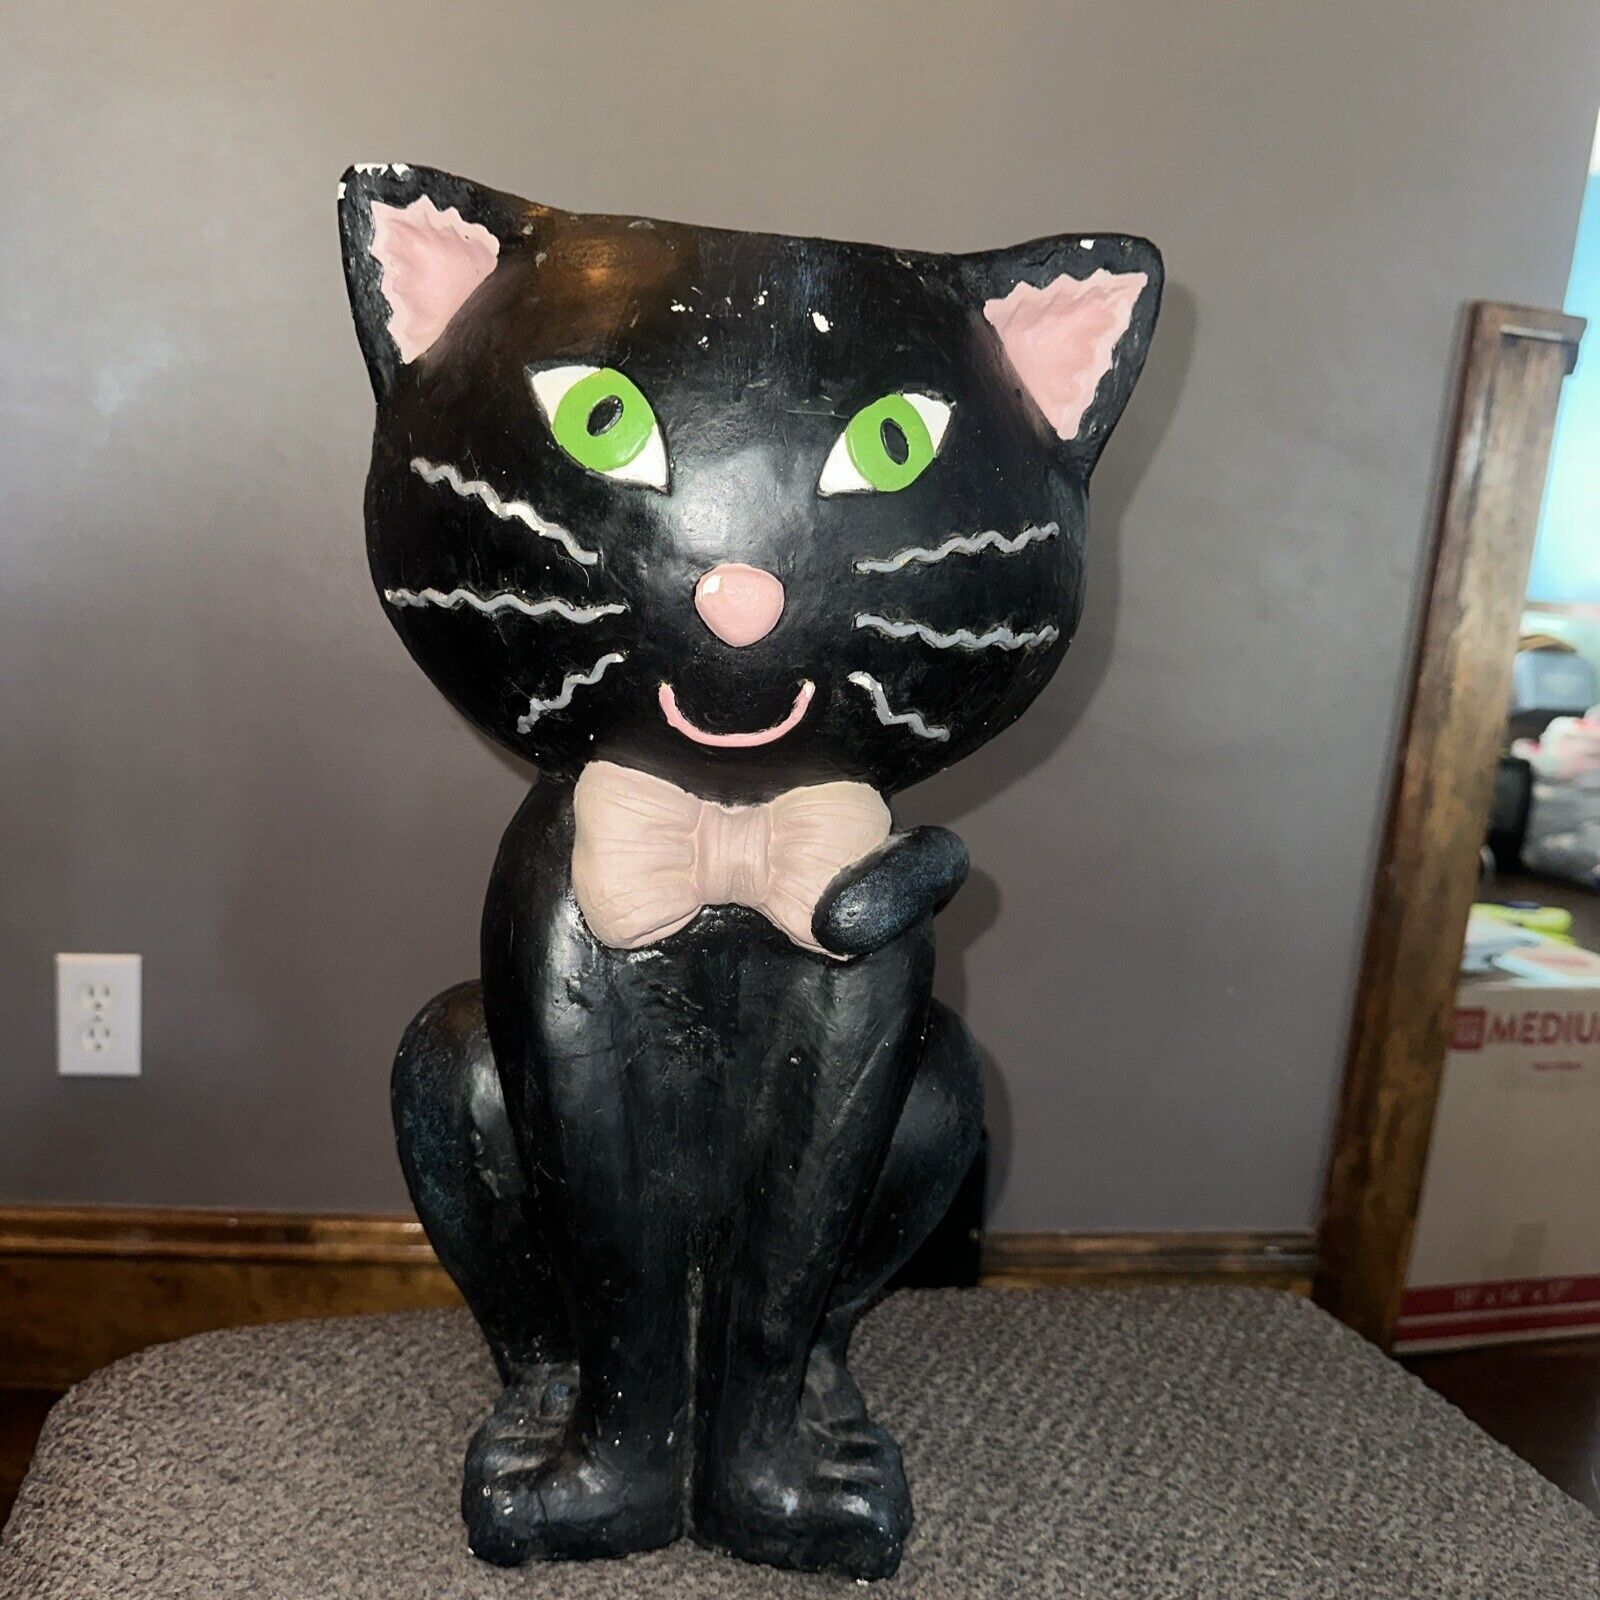 Rare Target 2003 Halloween Black cat candy bowl stands 18 1/2”tall x 11”wide